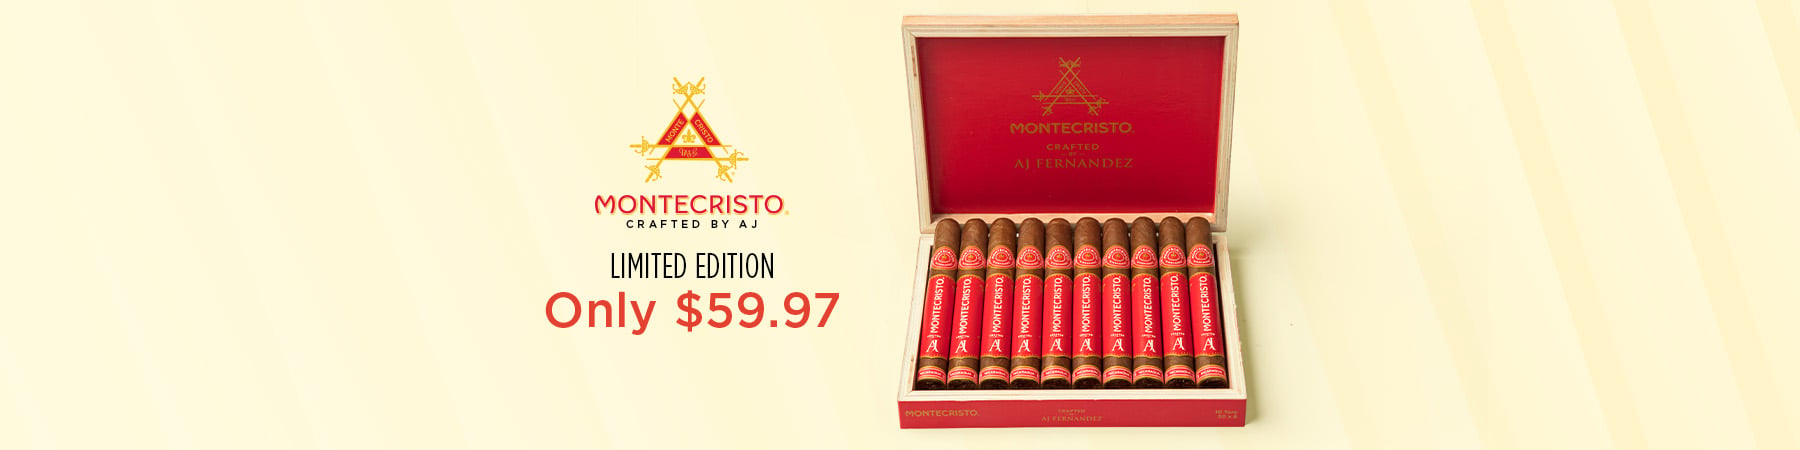 Montecristo Crafted by AJ Limited Edition Only $59.97